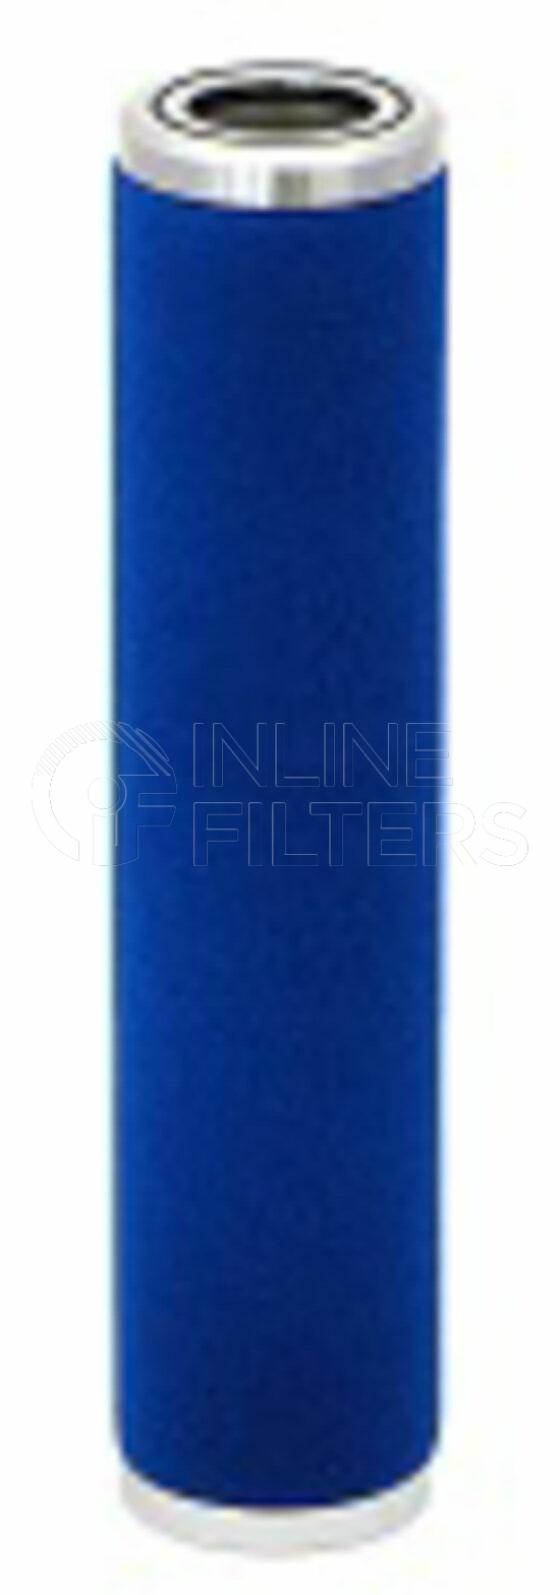 Inline FA10522. Air Filter Product – Compressed Air – Cartridge Product Air filter product